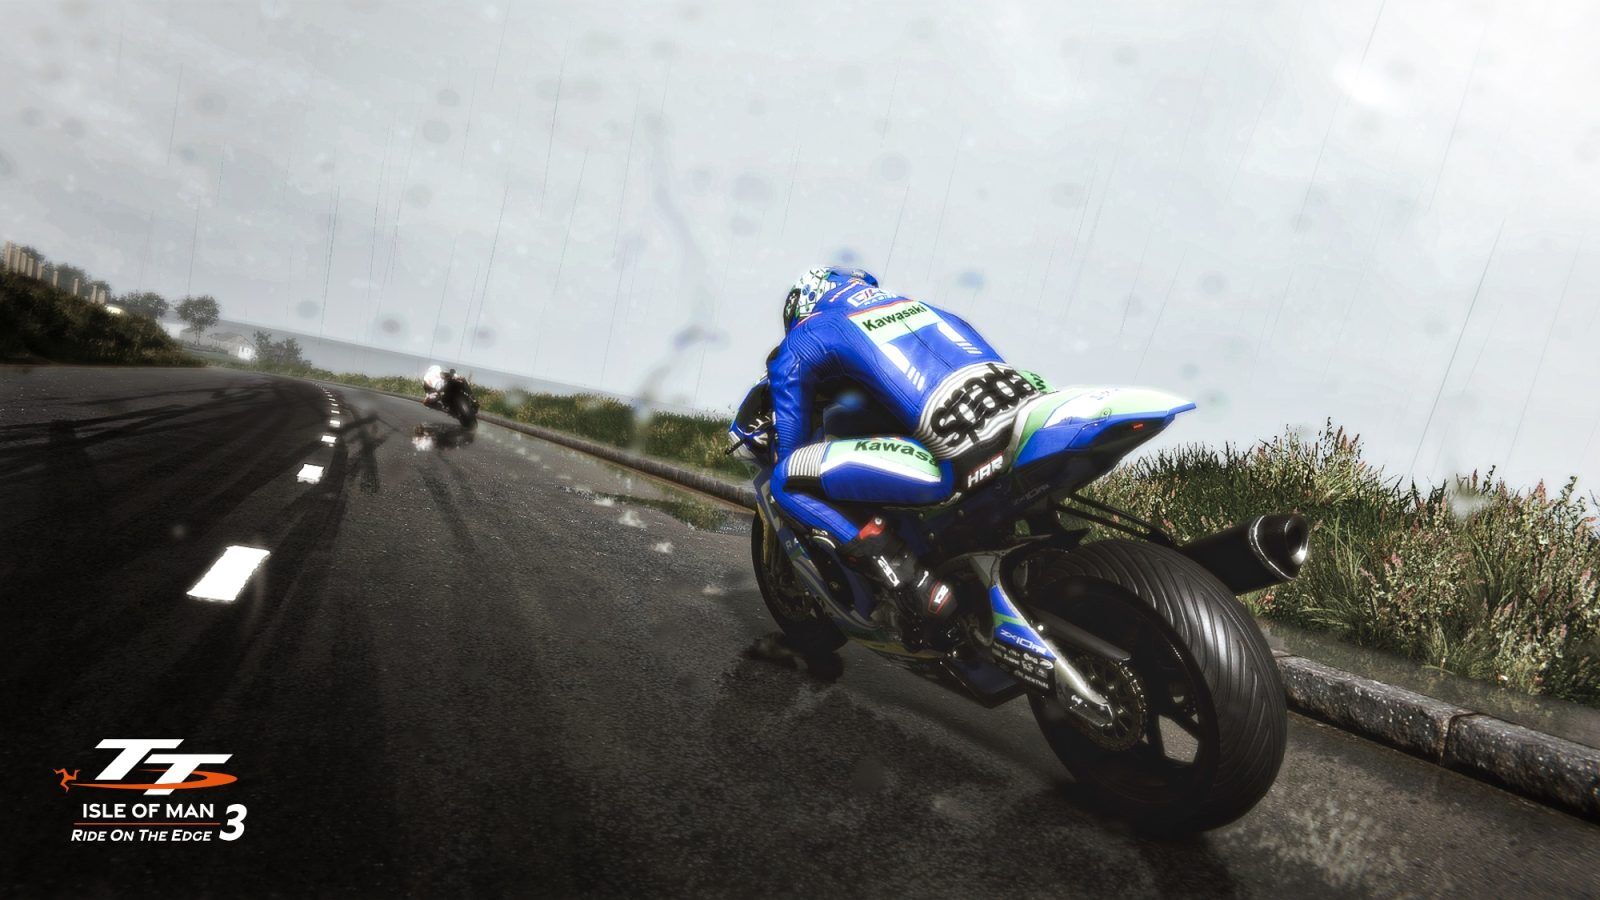 Events guide in TT Isle of Man Ride on the Edge 3